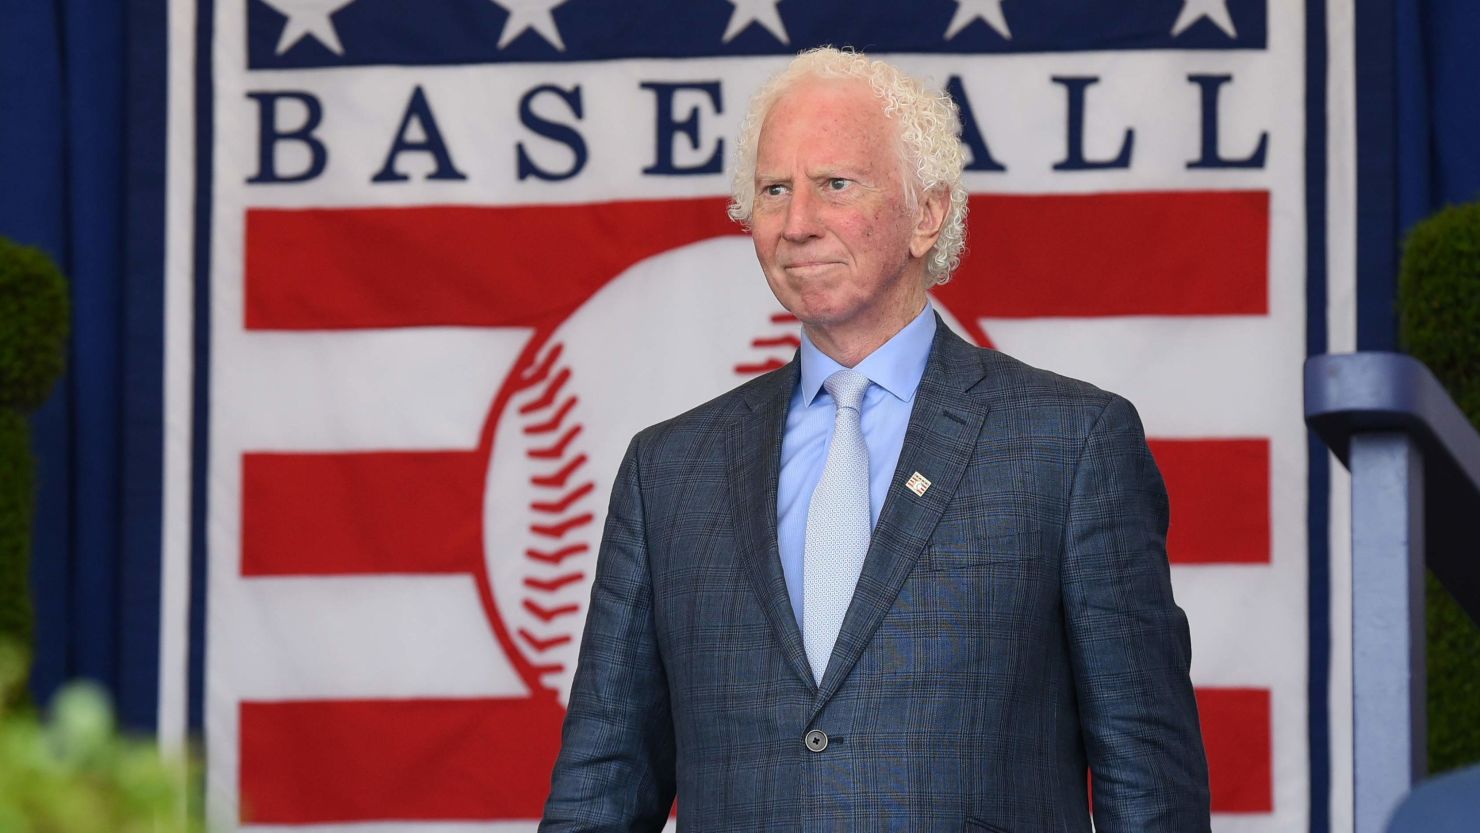 Hall of Famer Don Sutton is introduced during the Baseball Hall of Fame induction ceremony at the Clark Sports Center on July 29, 2018 in Cooperstown, New York.  